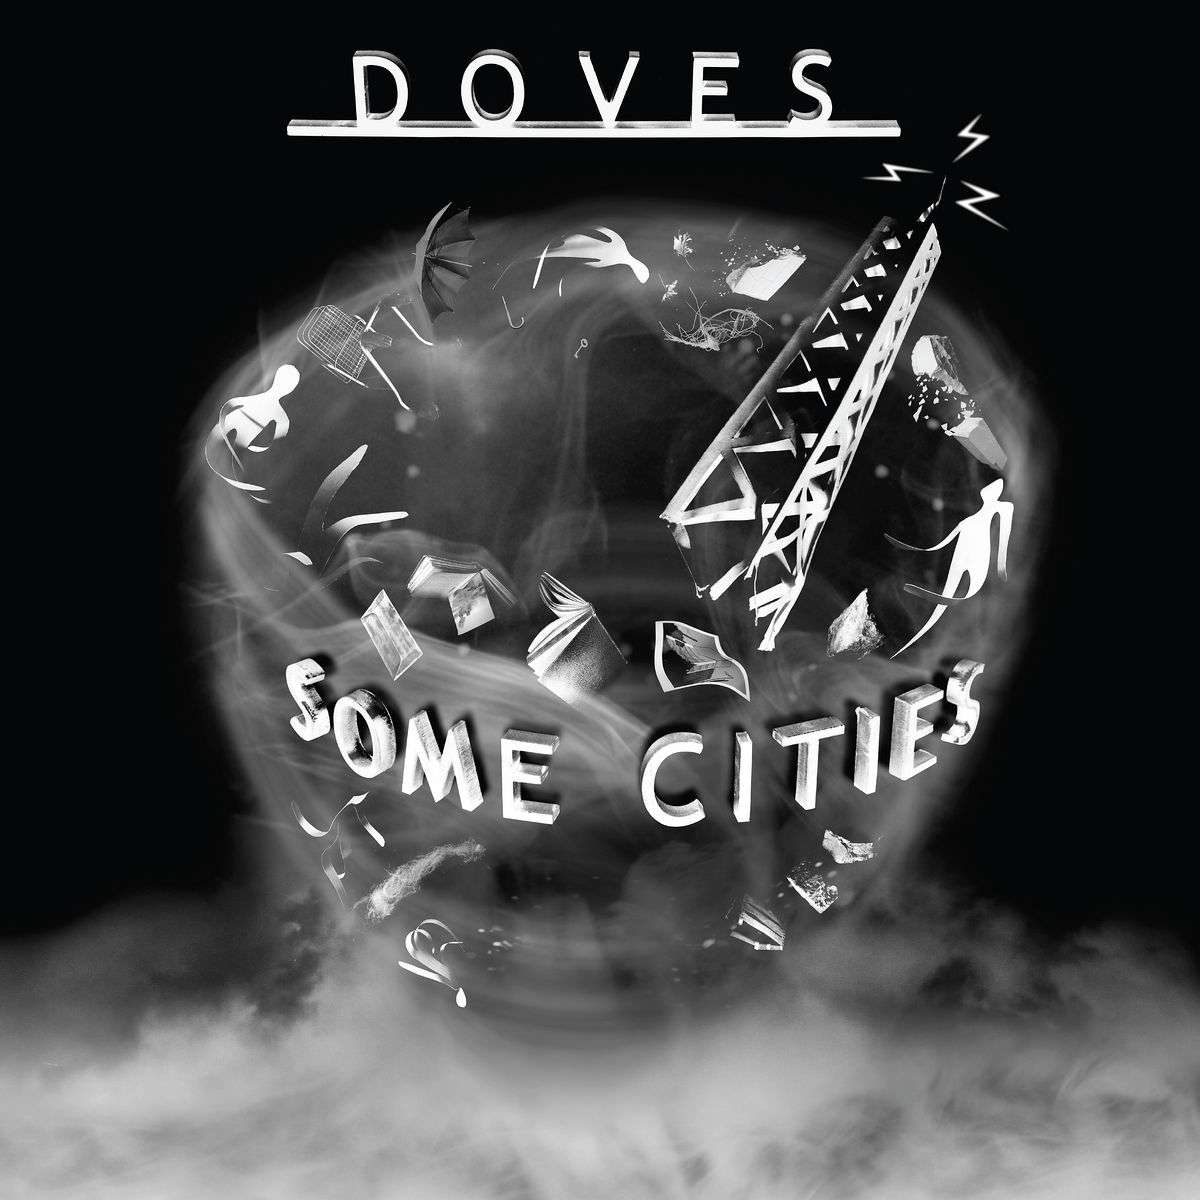 Doves - Some Cities - 33RPM